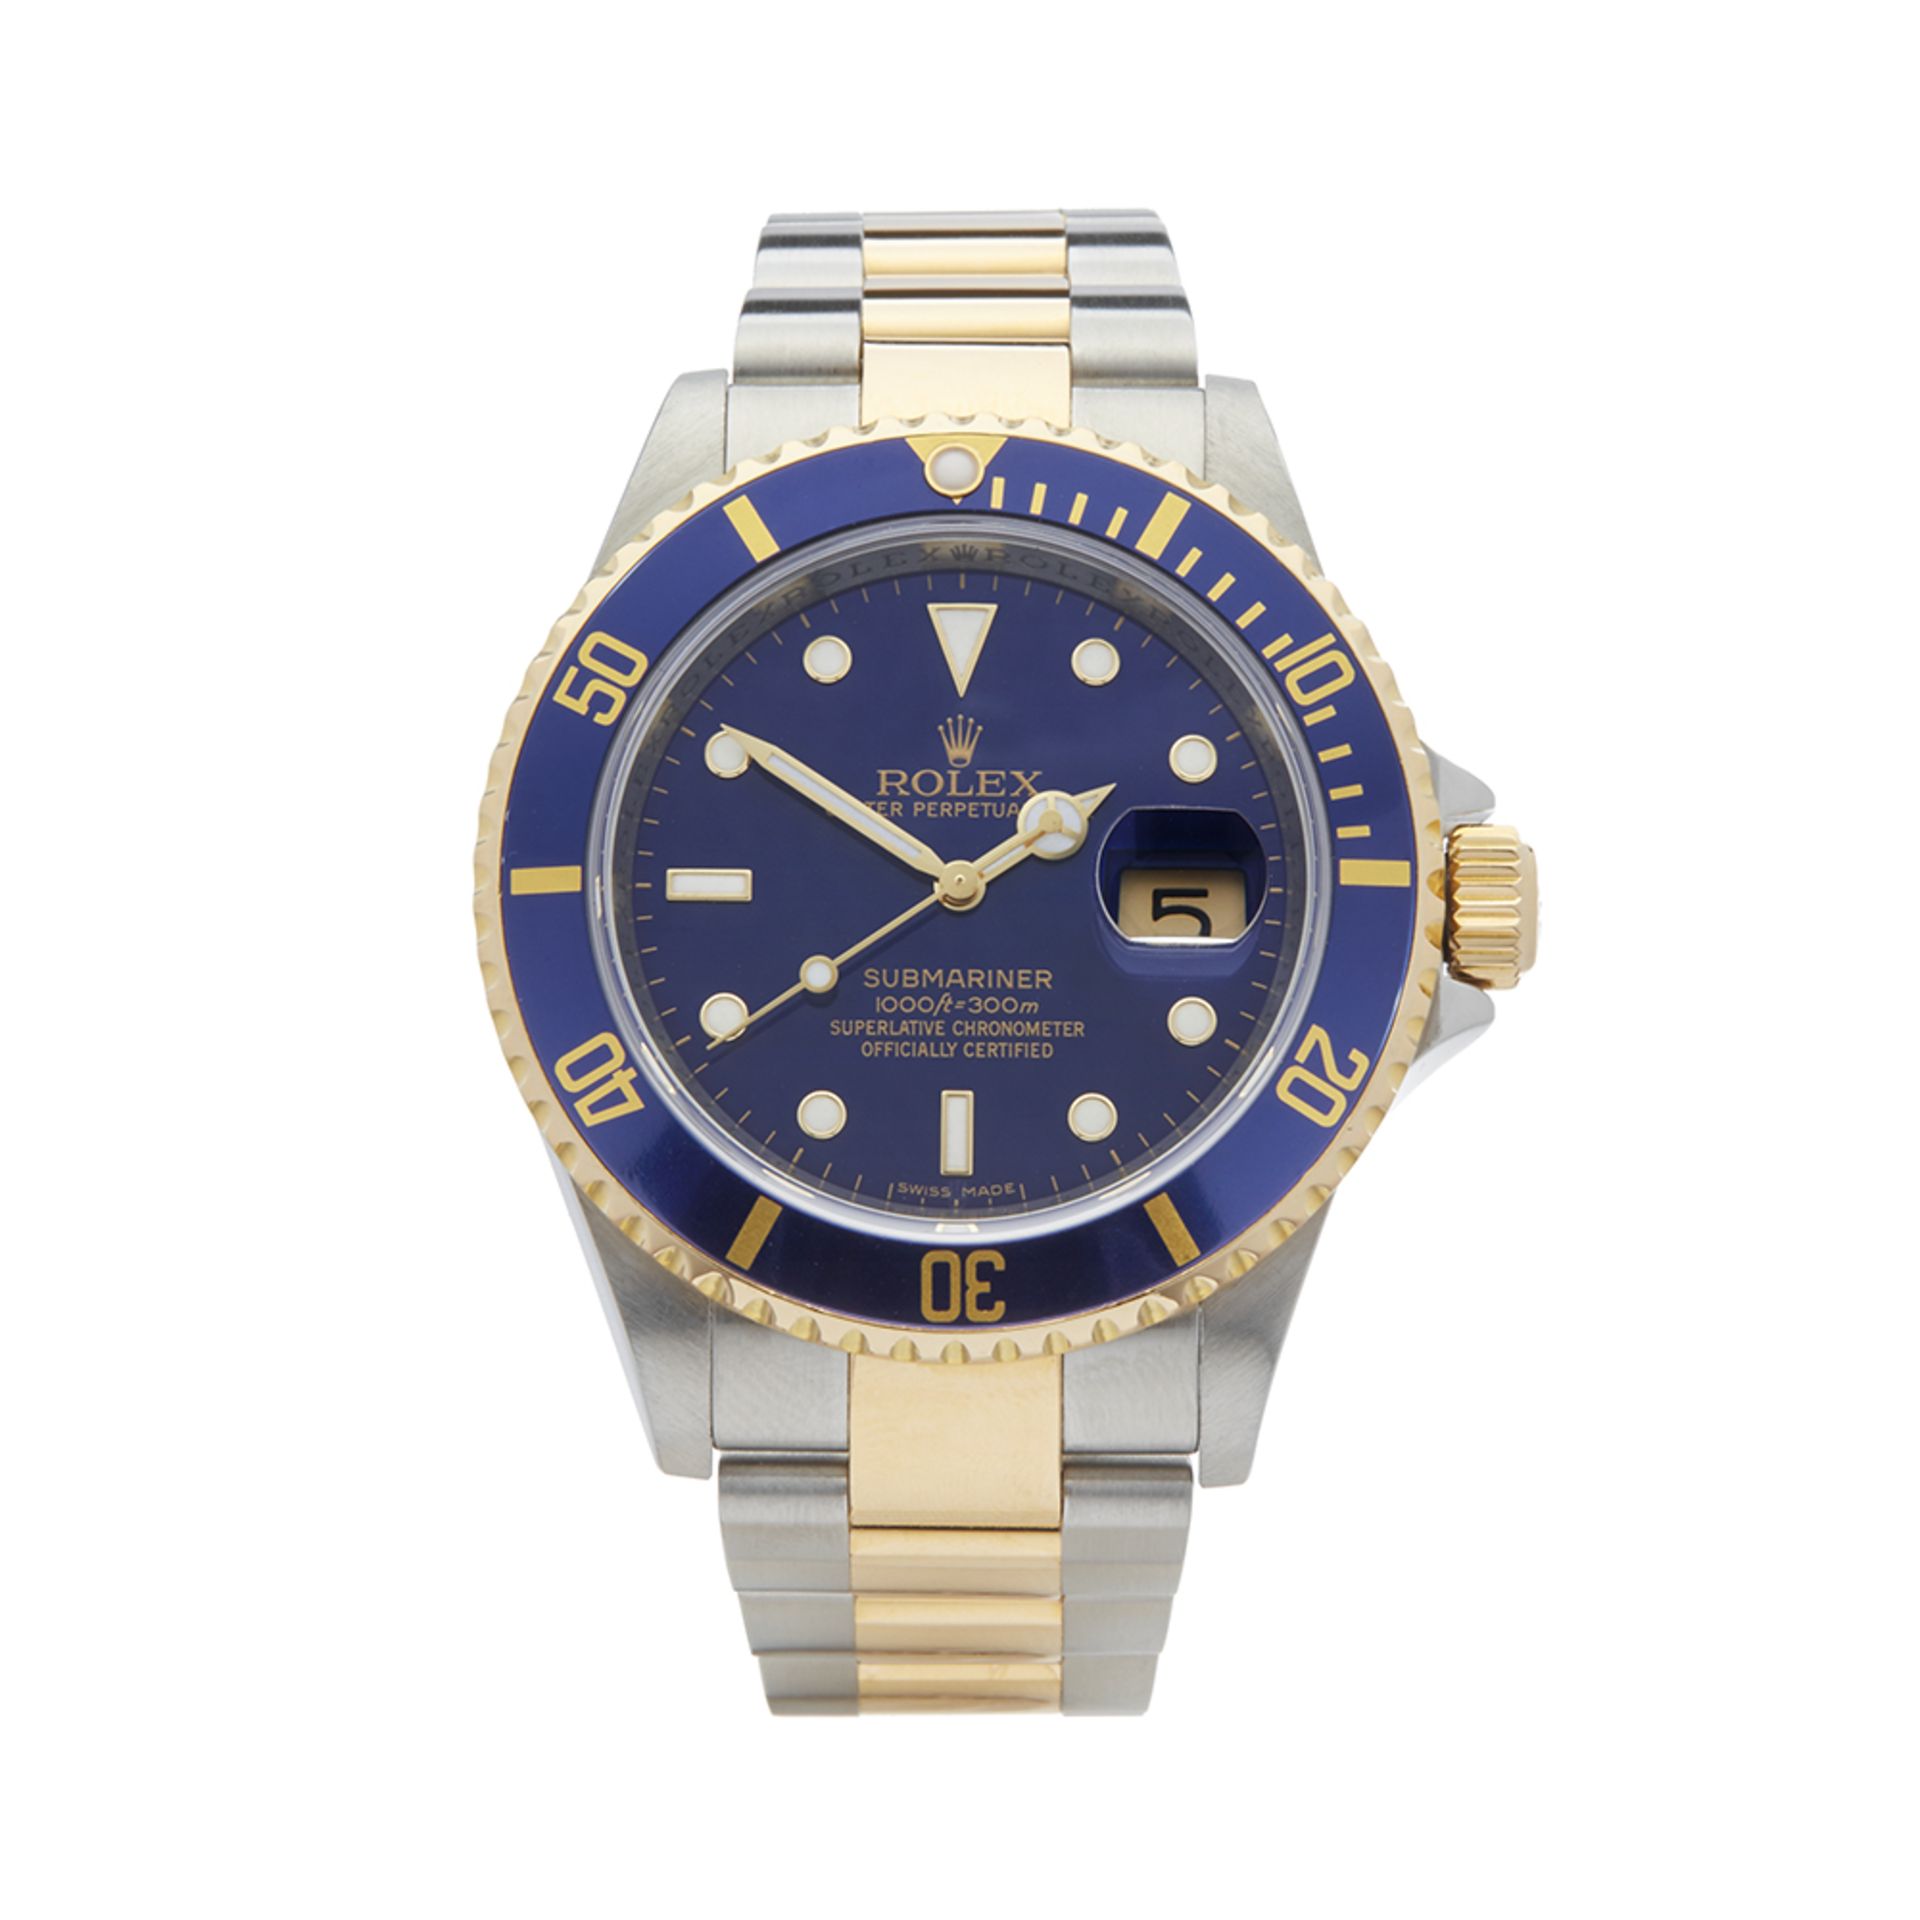 Rolex Submariner Stainless Steel & 18K Yellow Gold - 16613LB - Image 2 of 7